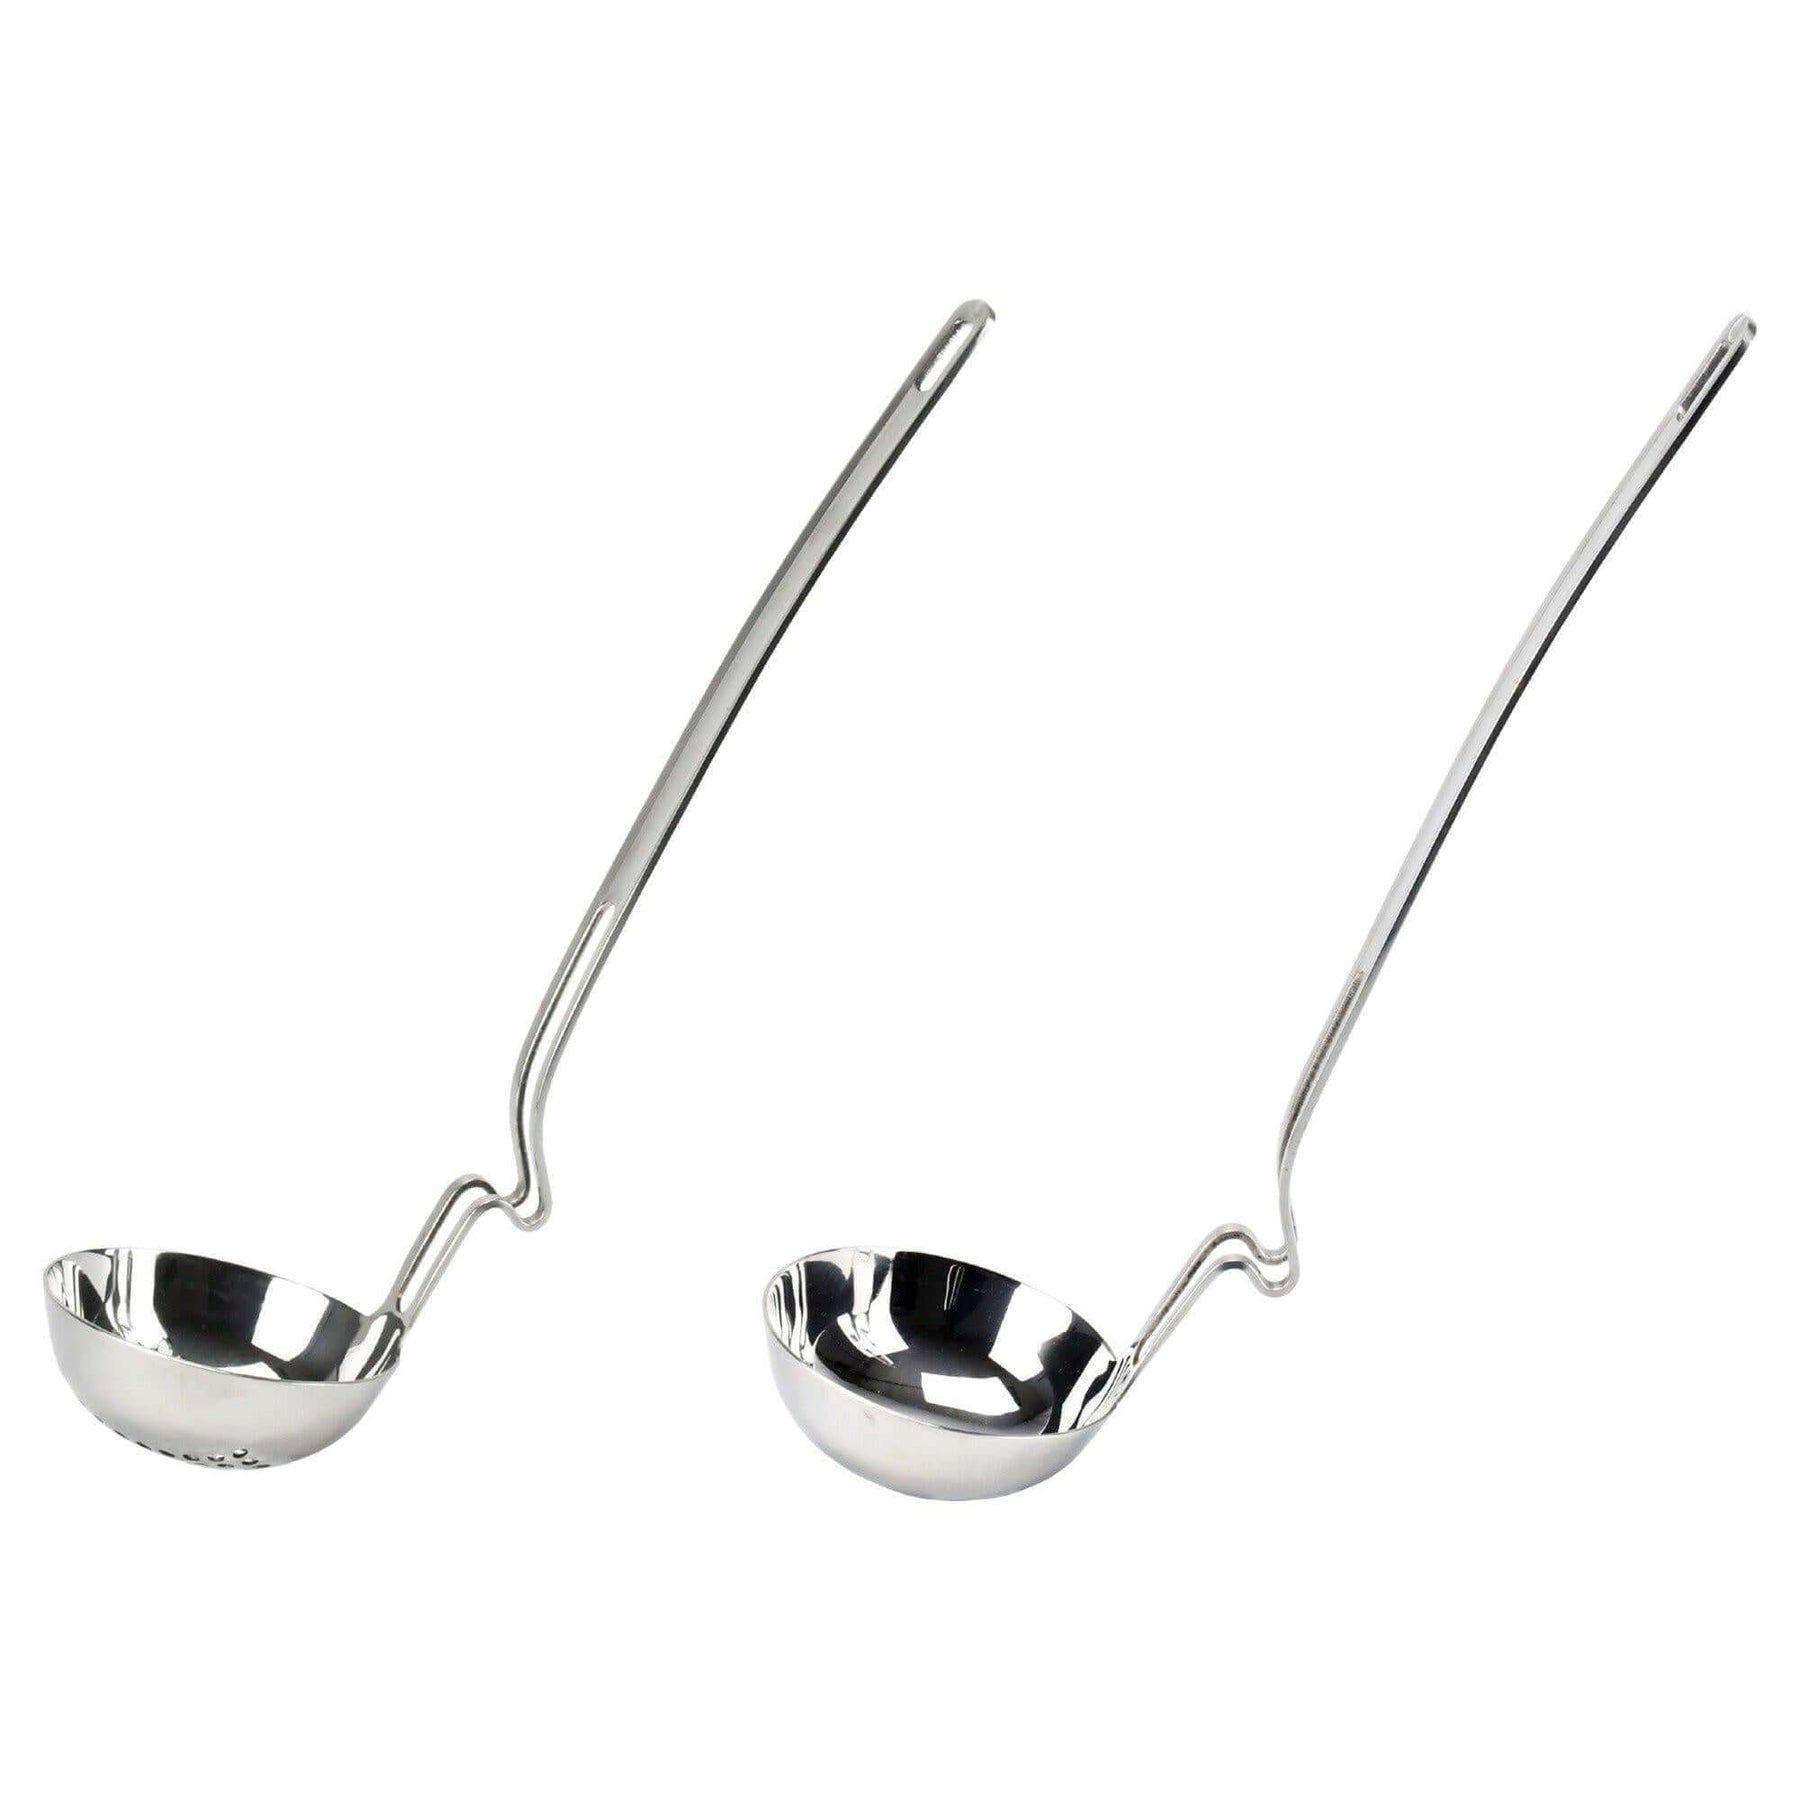 https://hansmart.com/cdn/shop/products/kitchentrend-2-piece-side-rest-hanging-ladle-slotted-spoon-strainer-set-with-unique-s-curved-handles-stainless-steel-958098-sw_1800x1800.jpg?v=1645458692